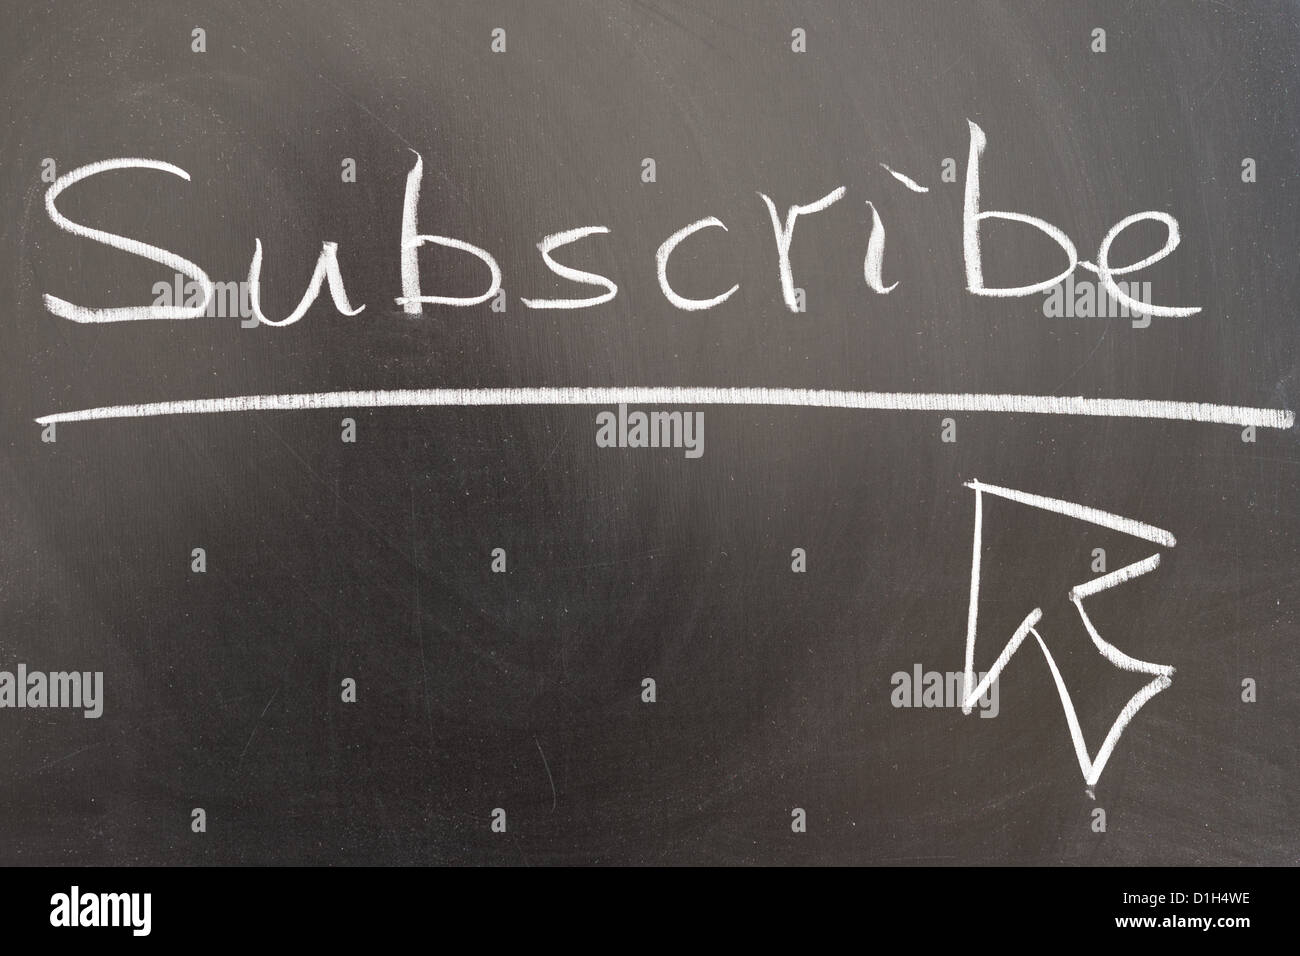 Subscribe and mouse pointer drawn on chalkboard Stock Photo